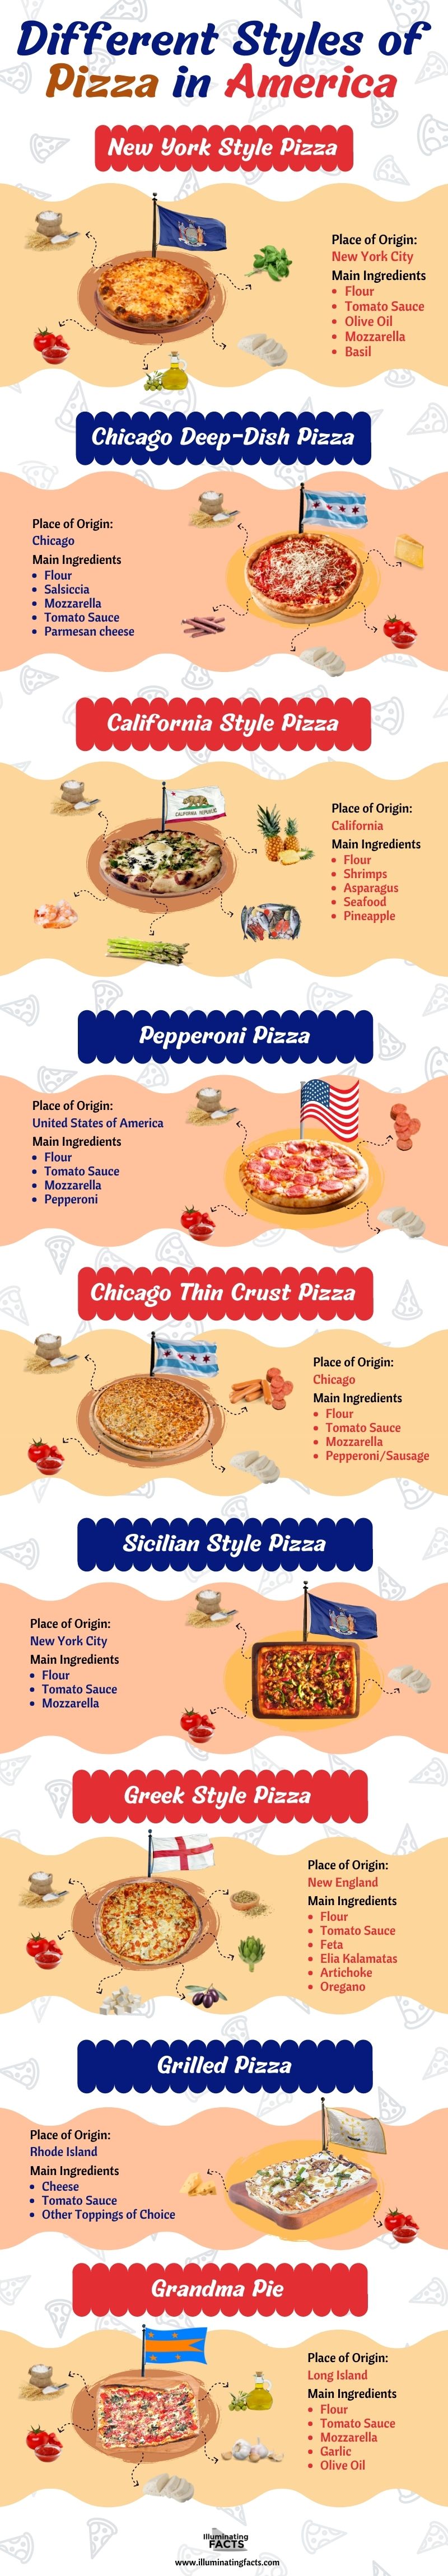 Different Styles of Pizza in America